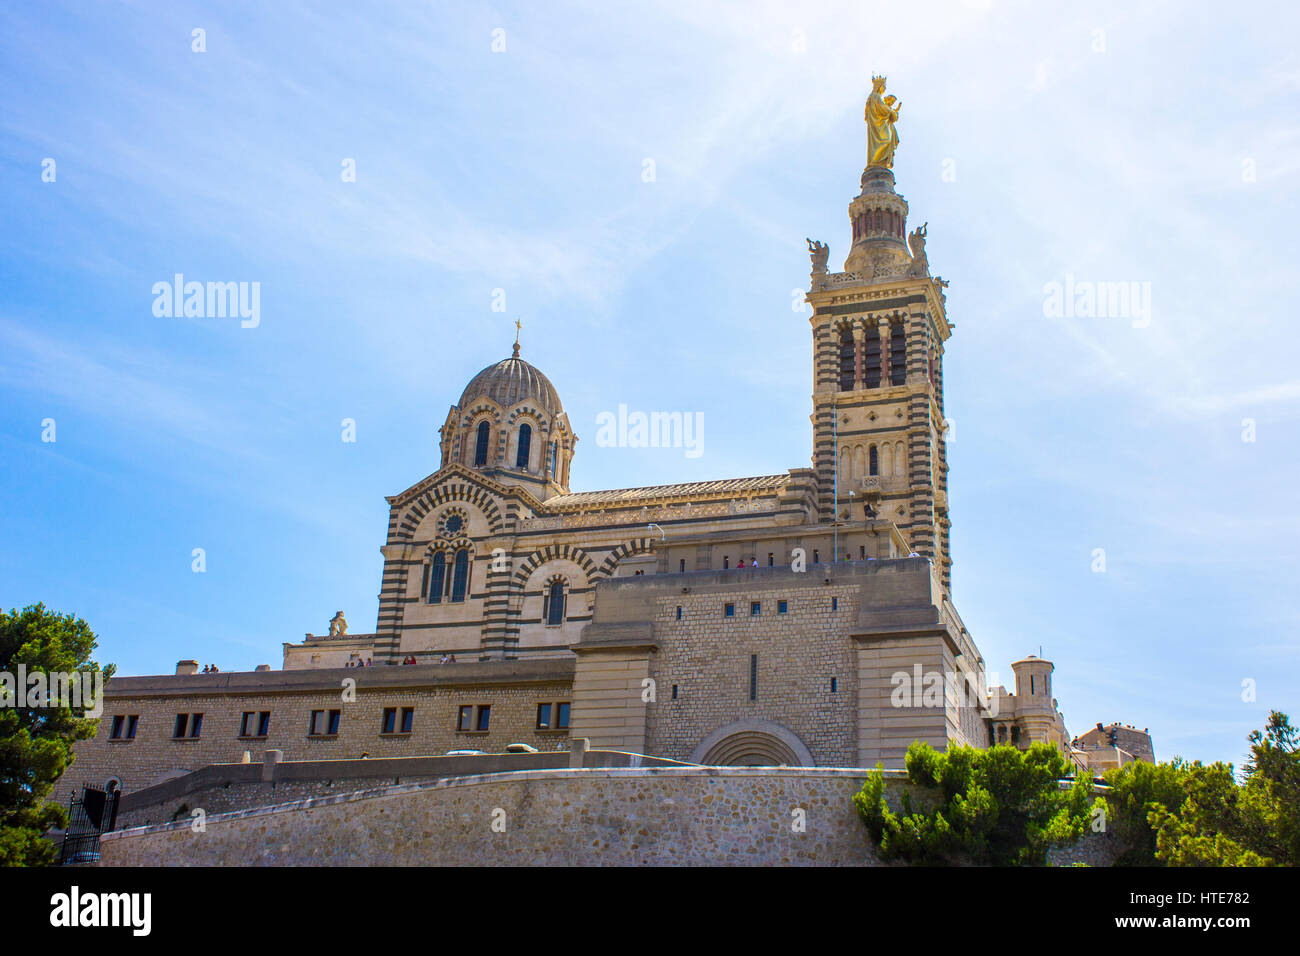 Notre-Dame de la Garde (Our Lady of the Guard), a Catholic basilica and pilgrimage site in Marseille, France,and the city's best-known symbol. Stock Photo